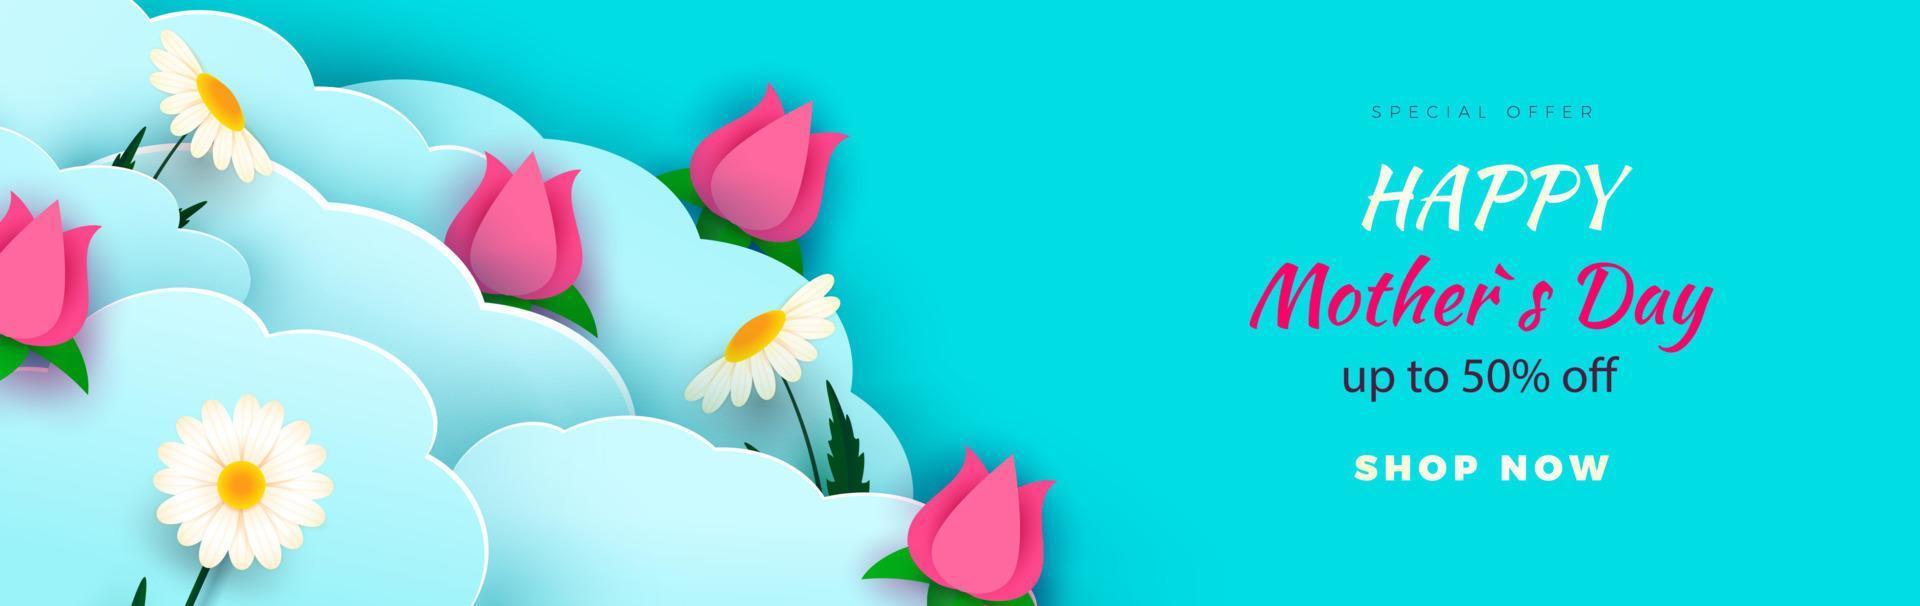 Happy Mother s Day sale header or voucher template. Roses, daisies and paper-cut clouds. Horizontal banner with blue sky and flowers.Discounts for the holiday Vector illustration